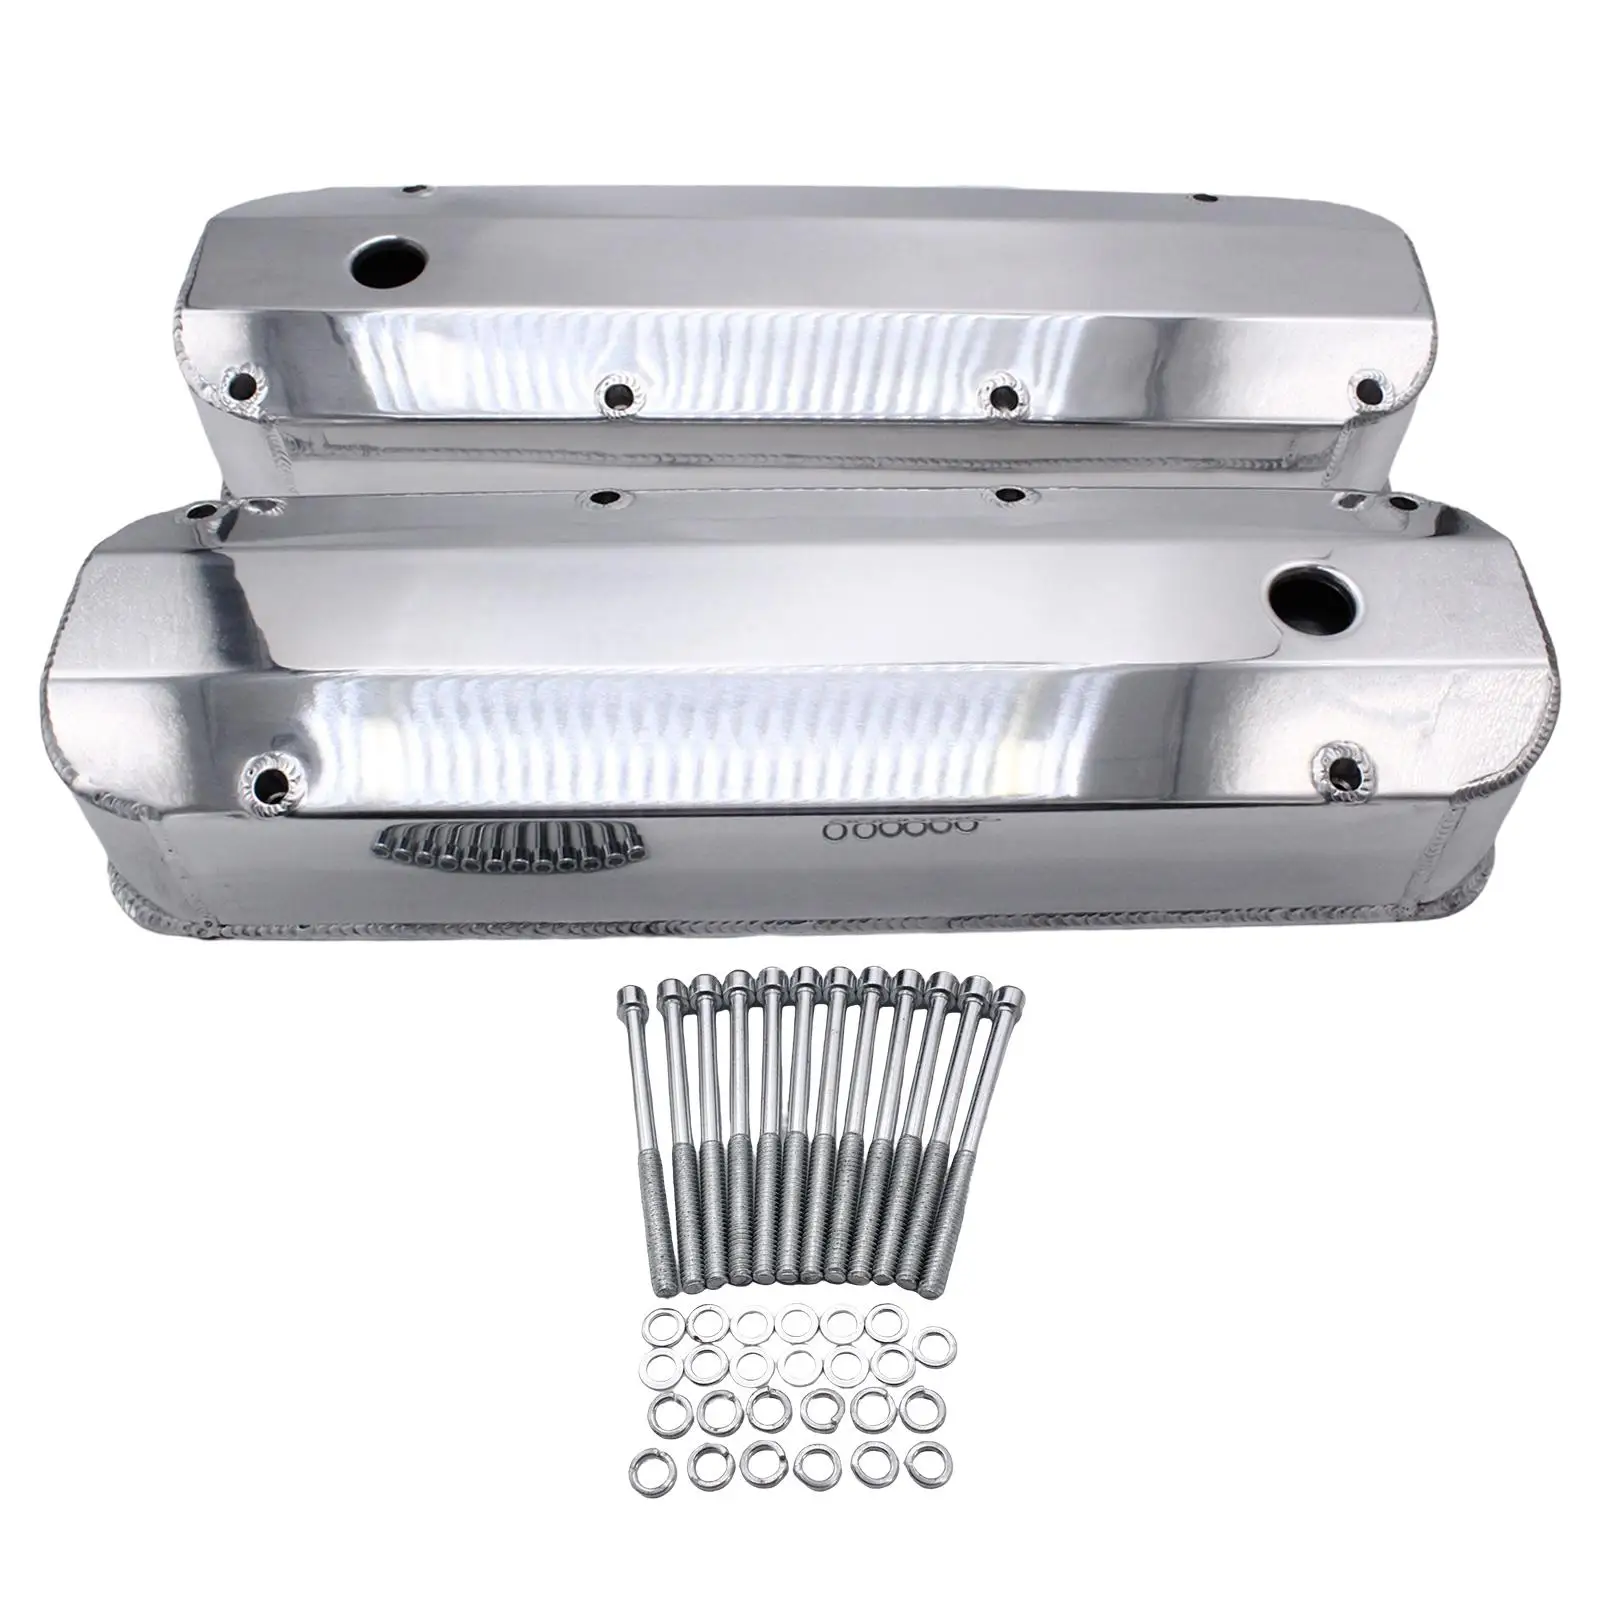 Aluminum Valve Covers Replace Parts for Ford Big Block 429 460 Durable